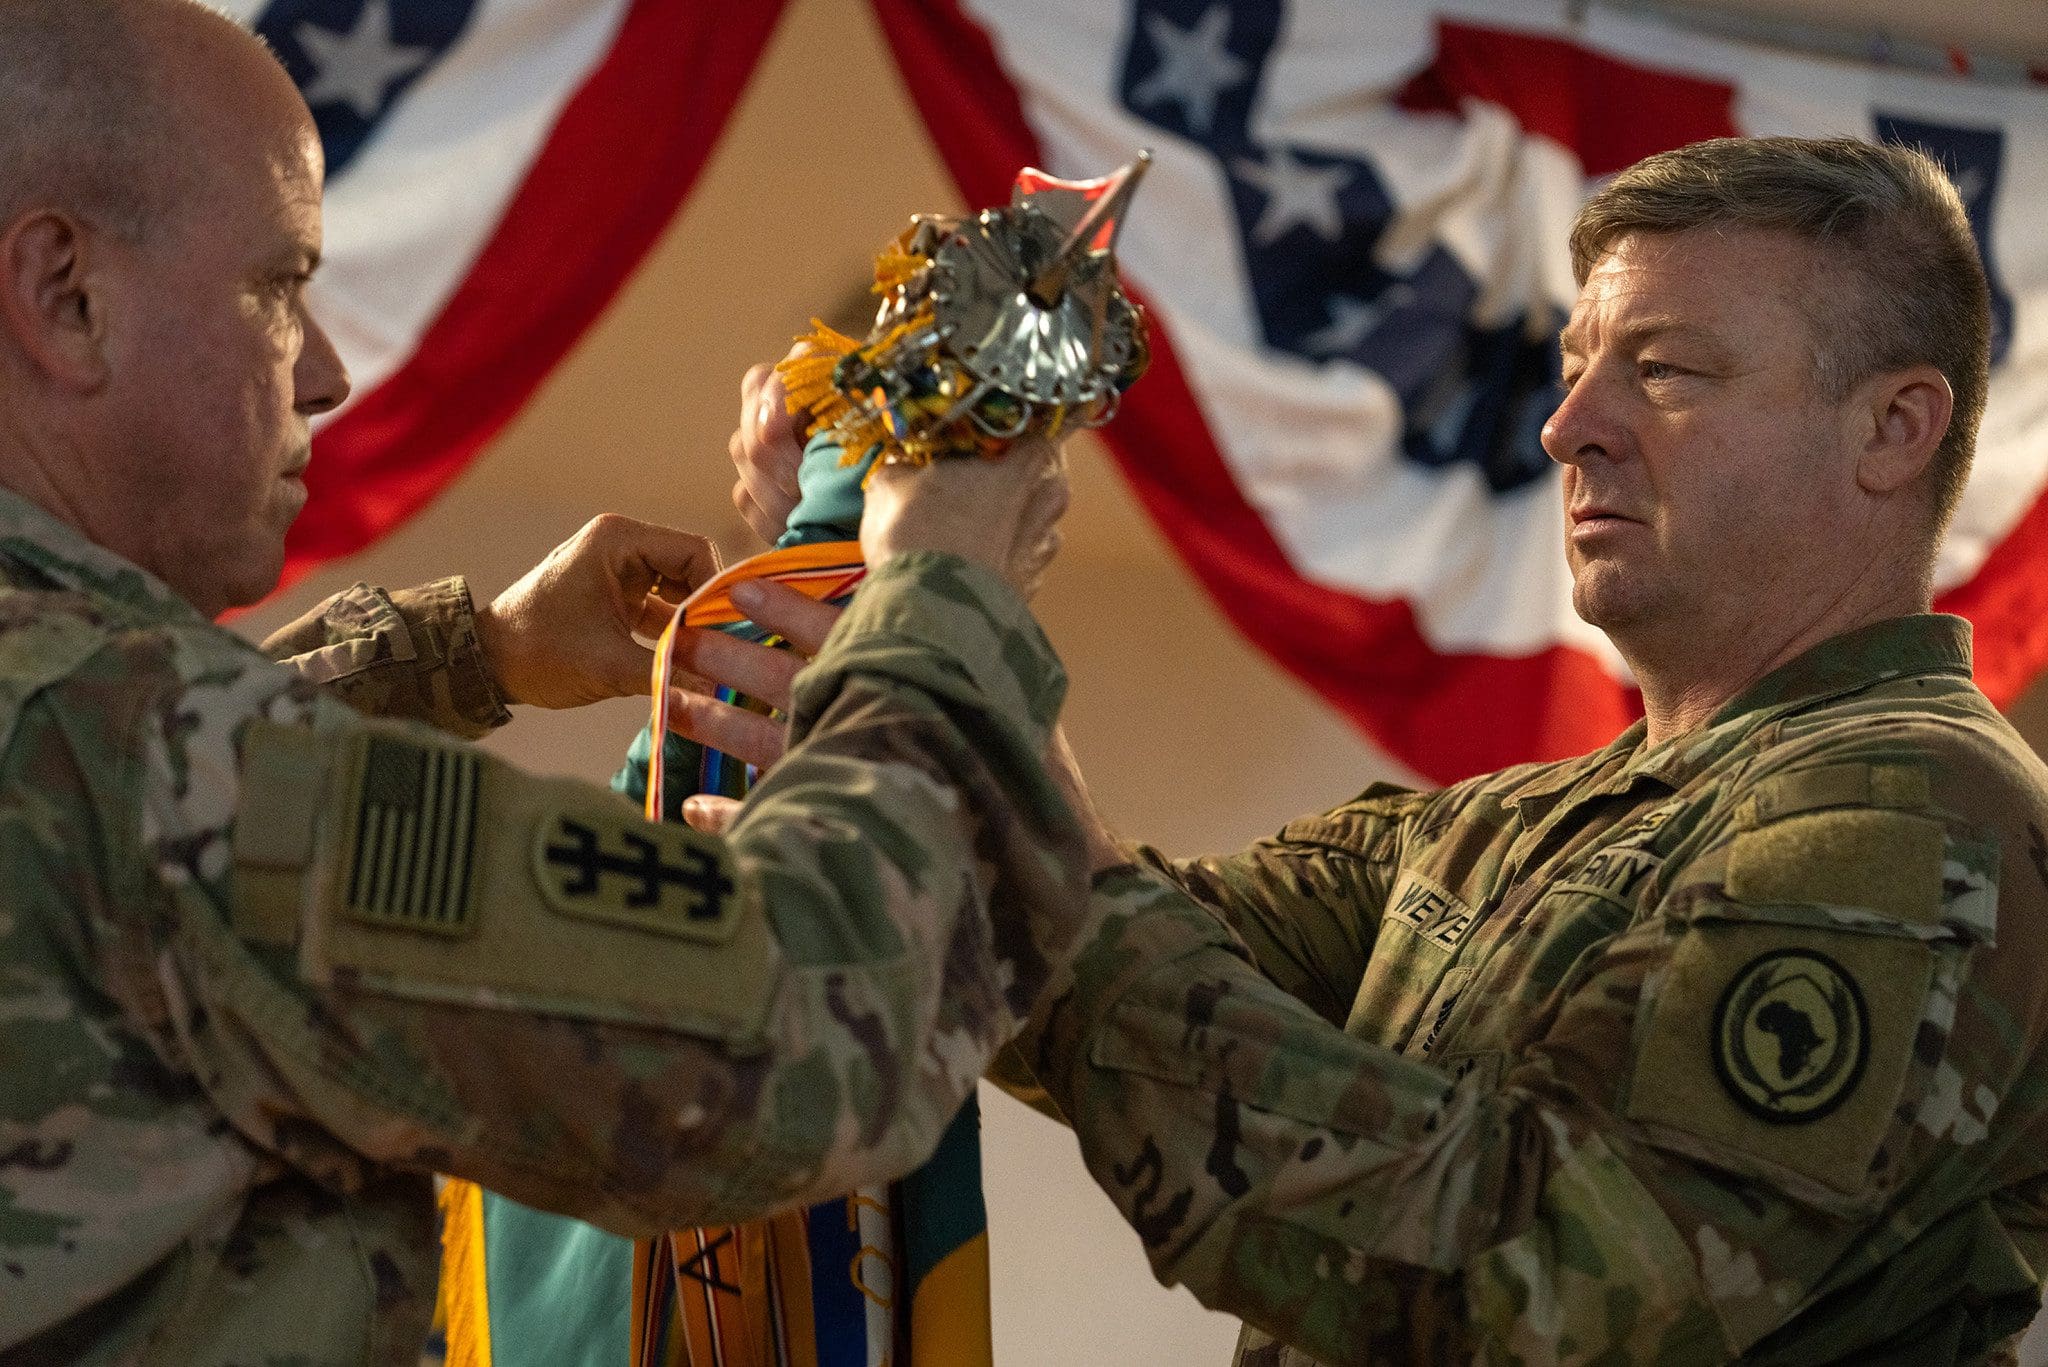 Col. Eric Leckel and Command Sgt. Maj. Duane Weyer, commander and senior enlisted leader for the Wisconsin Army National Guard’s 157th Maneuver Enhancement Brigade, case their brigade colors during a Transfer of Authority ceremony at Camp Lemonnier, Djibouti, July 14. Unit colors traditionally serve to signal the presence of that unit in a field or garrison environment — the ceremony signifies the pending departure of one unit and the emplacement of the other. Department of Defense photo by U.S. Air Force Staff Sgt. Dylan Gentile 